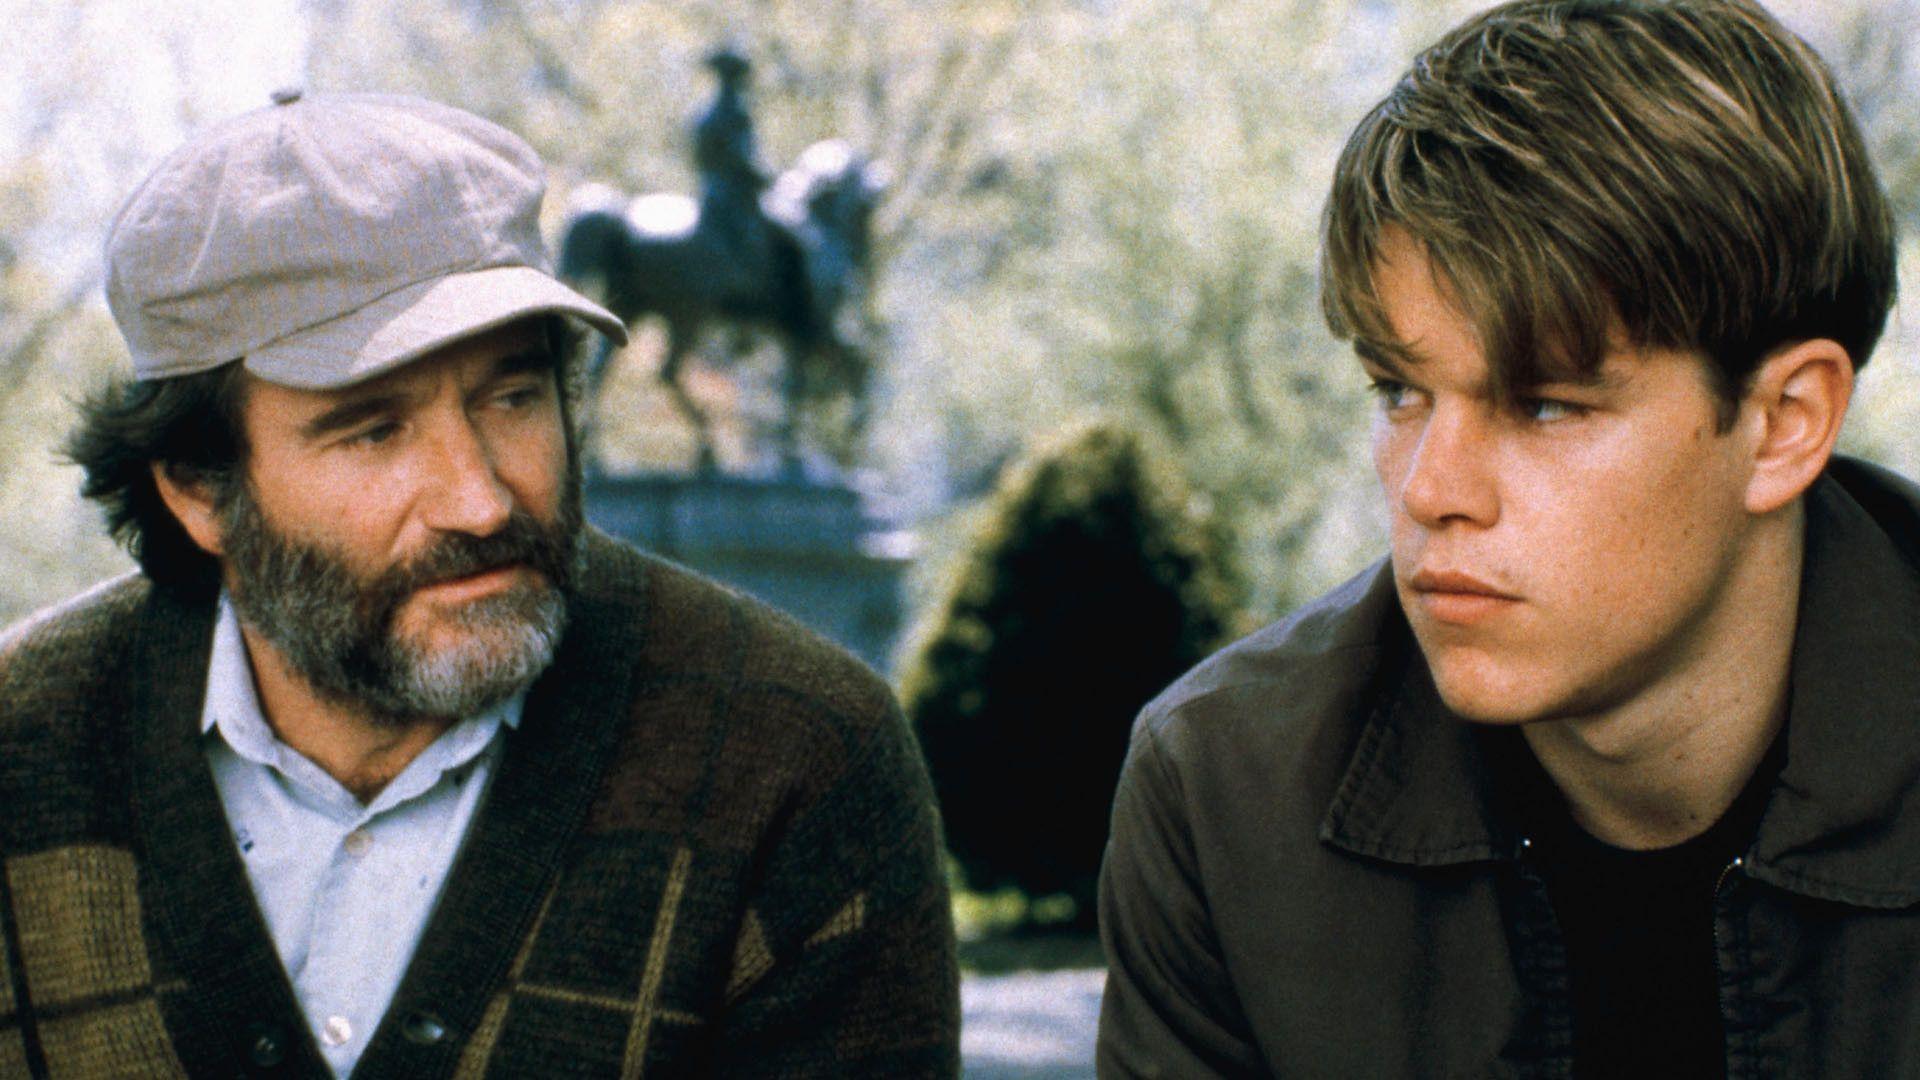 How does that Good Will Hunting speech go?. What can I learn today?